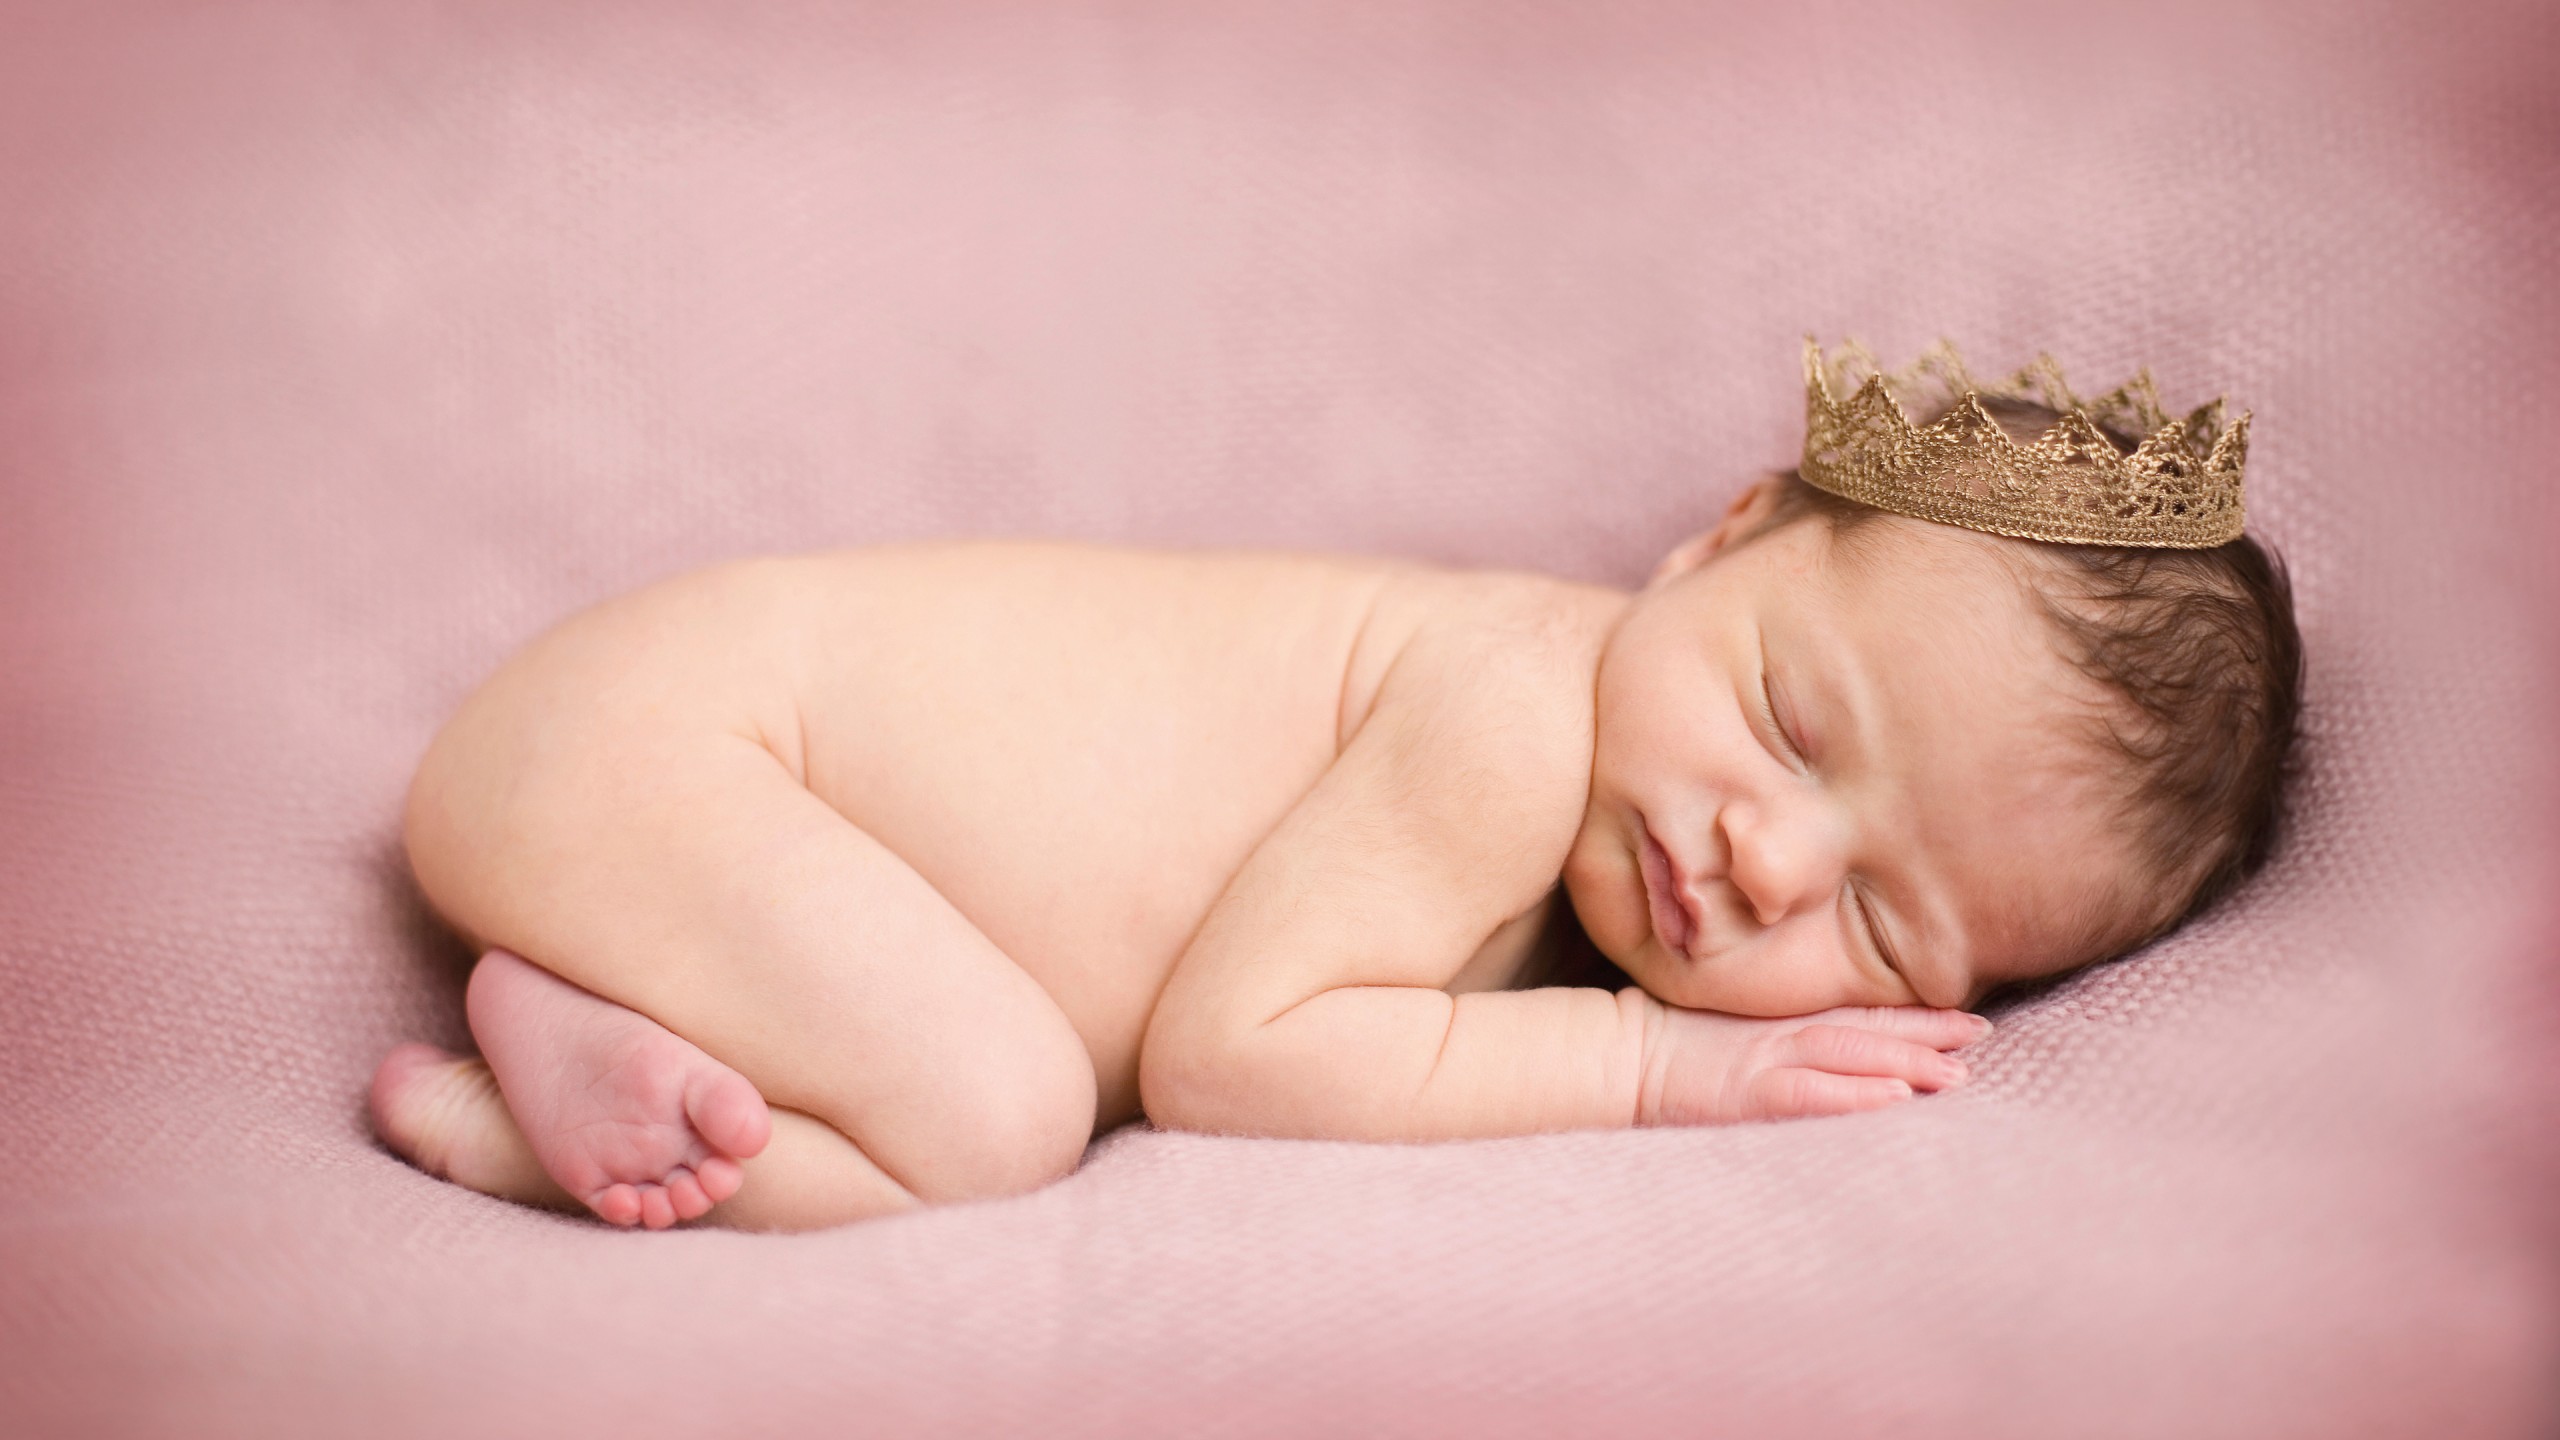 Sleeping Baby Background Ppt - HD Wallpaper 